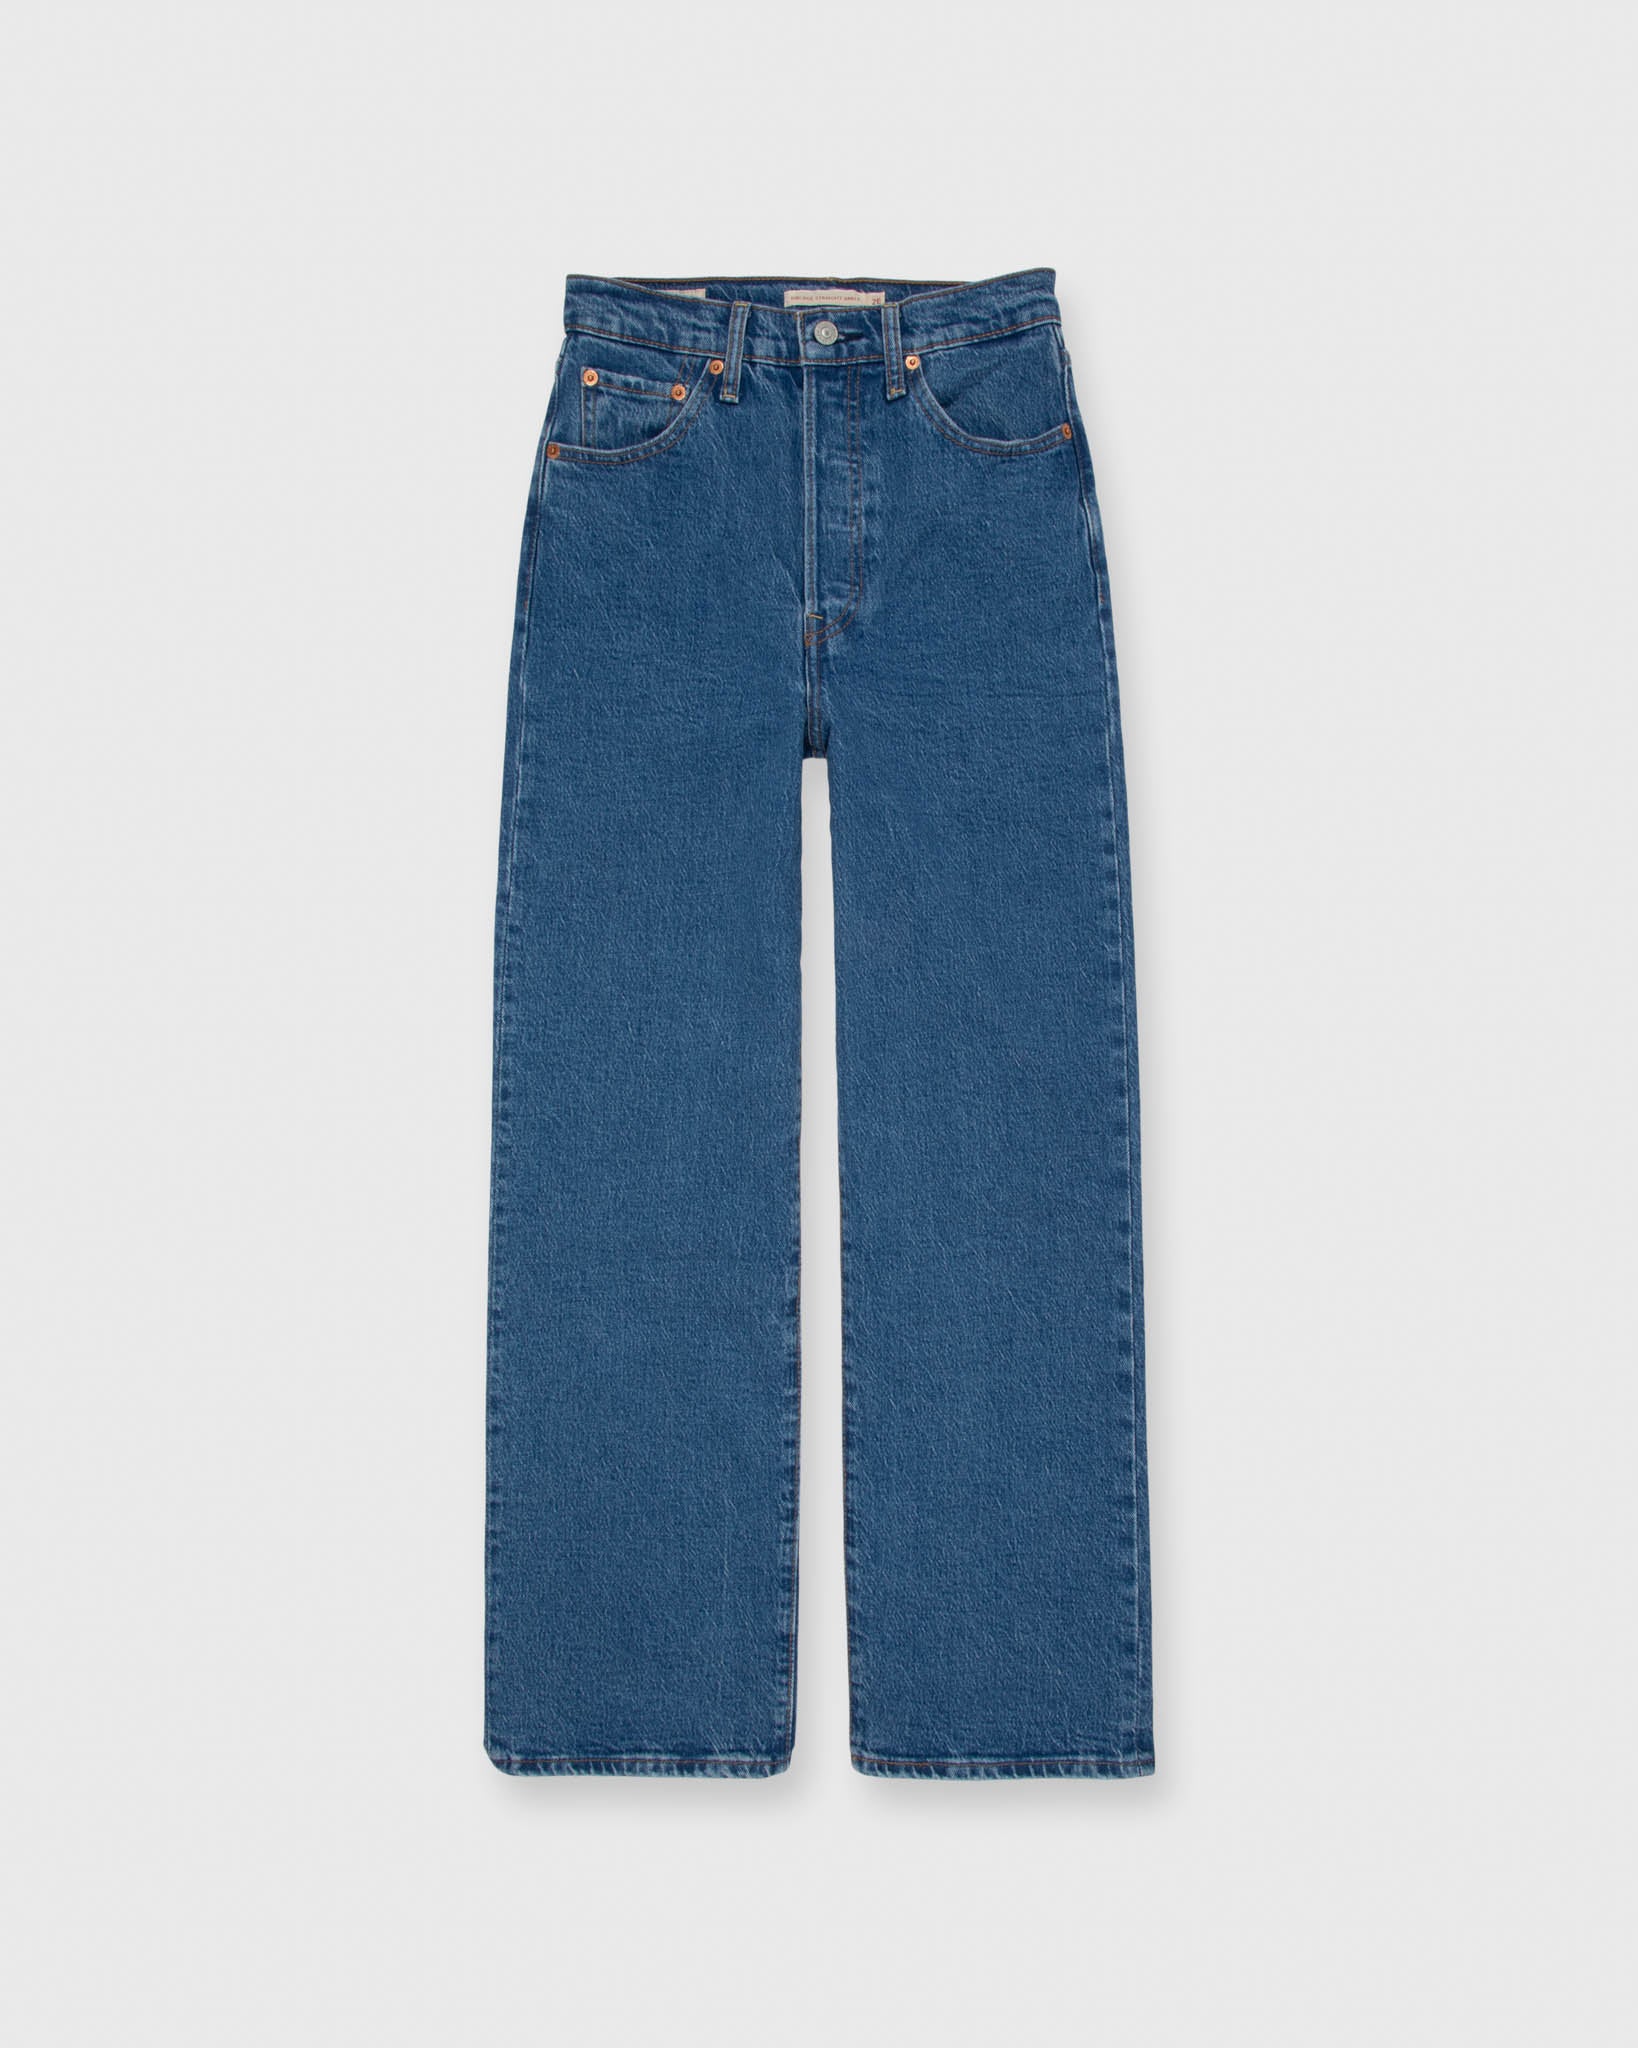 Ribcage Straight Ankle Jean in Jazz | Shop